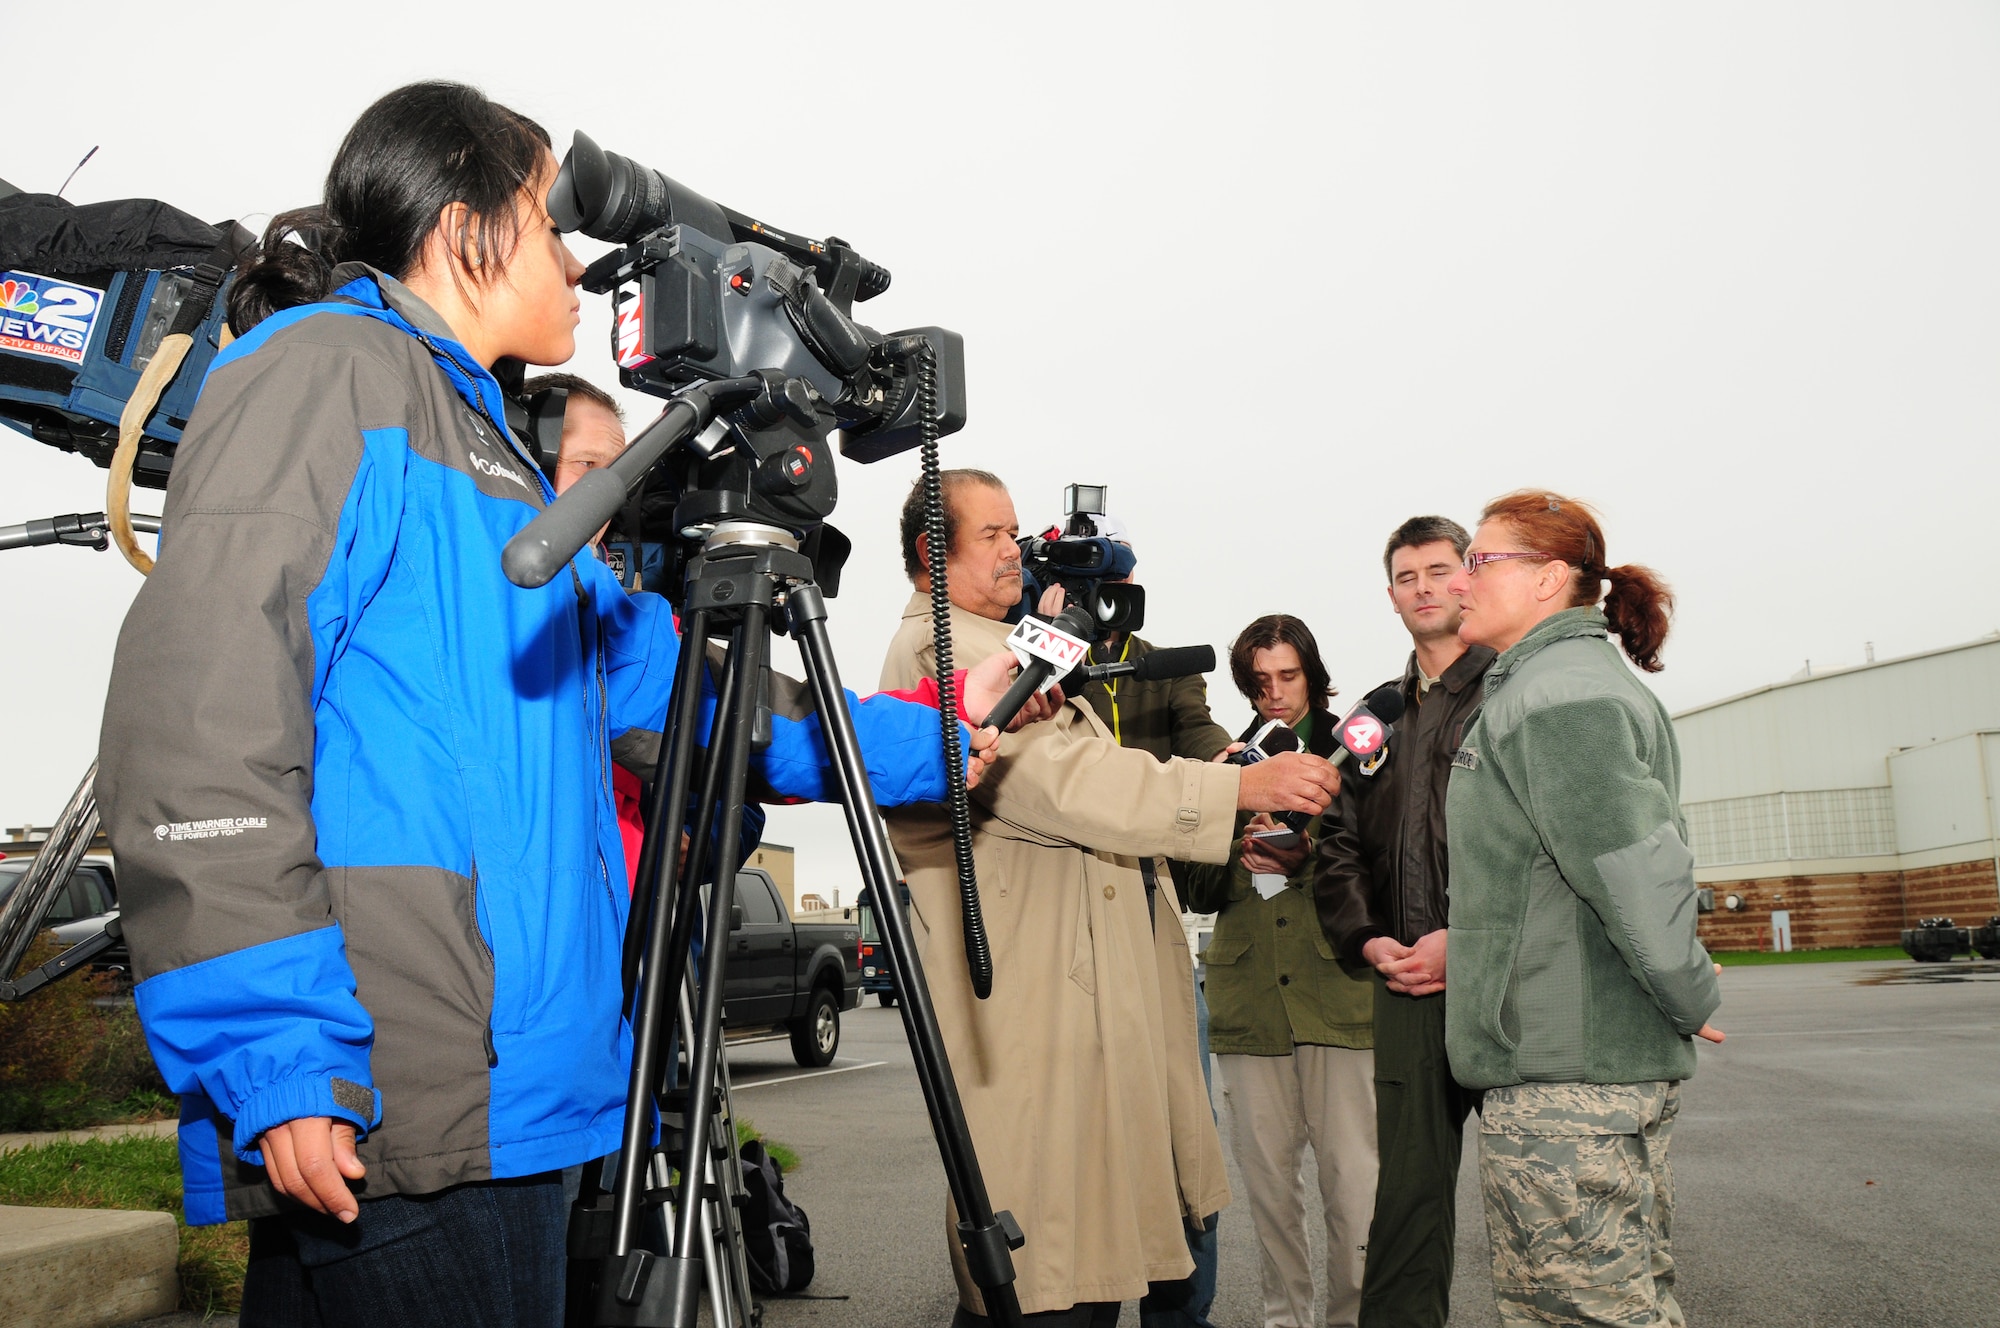 75 members of the 107th Airlift Wing have deployed downstate to aid in Hurricane Sandy recovery efforts. 1st Lt. Cory Bota and Master Sgt. Laura Thomas are interviewed with the local press about their deployment to New York City. Oct. 30, 2012 (National Guard Photo/Senior Master Sgt. Ray Lloyd)
